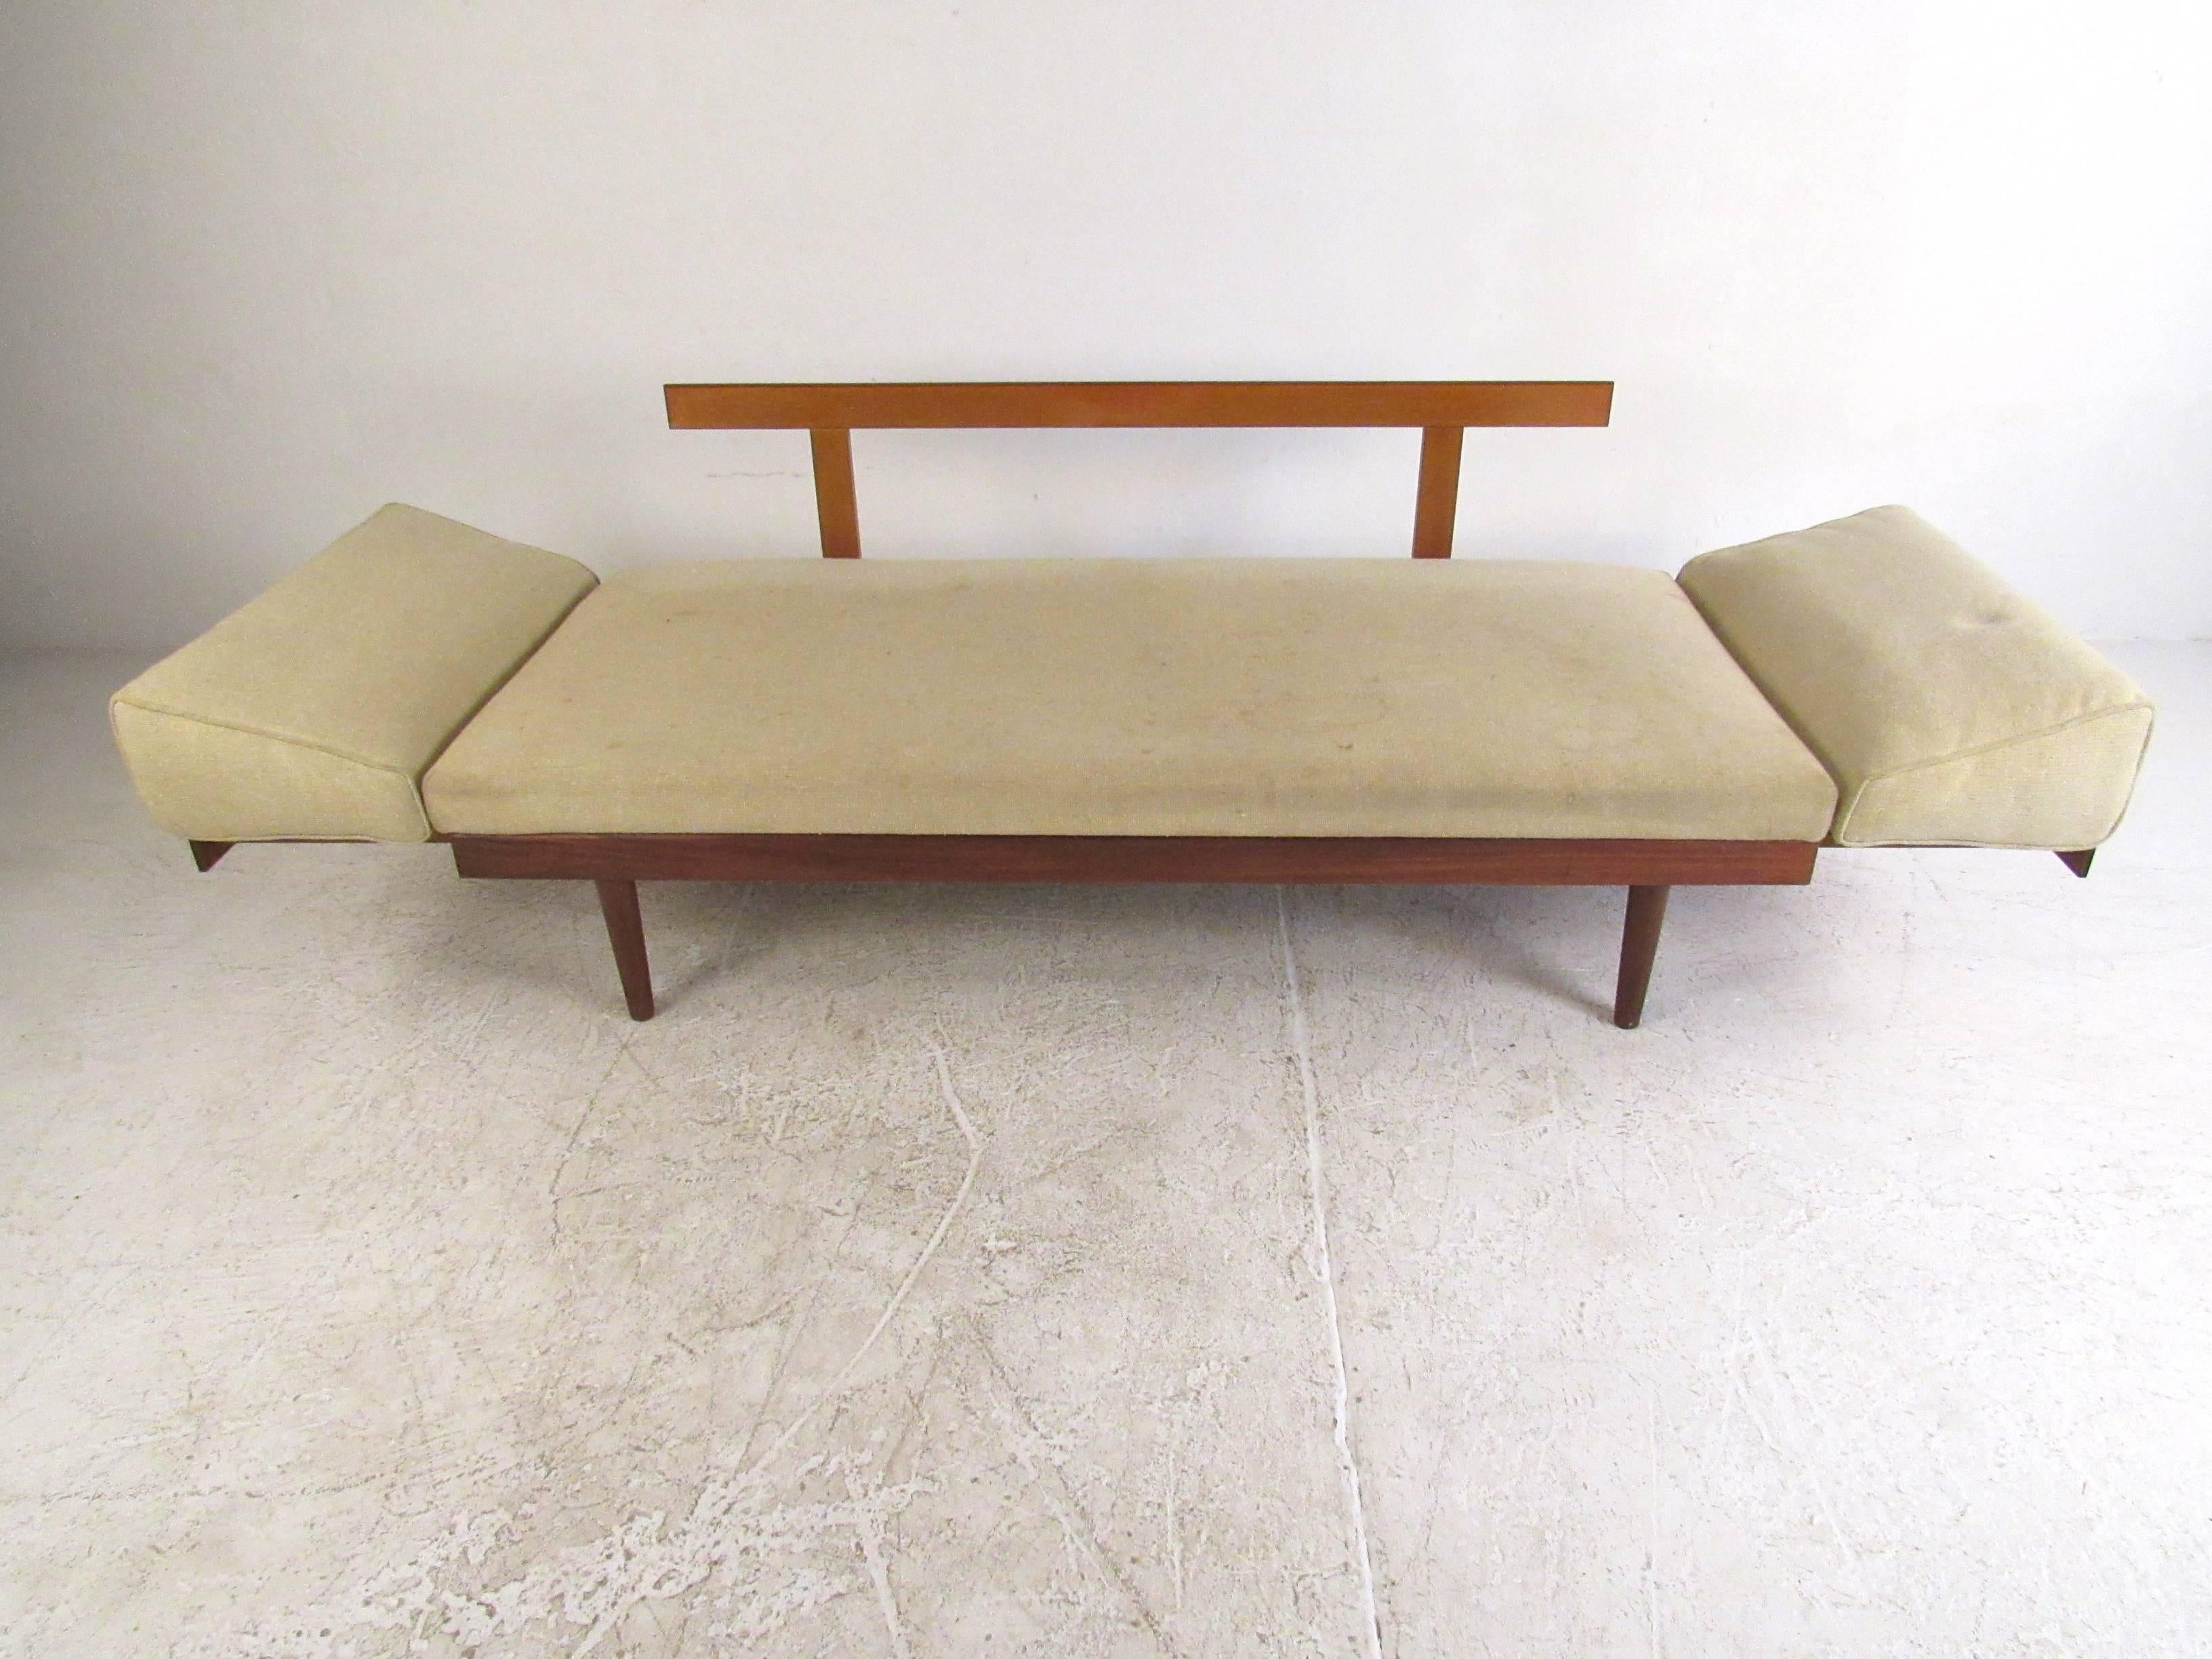 This beautiful vintage daybed features subtle Danish modern style and offers unique slide-out teak end tables to allow conversion into a full length 90 inch wide daybed. Versatile Mid-Century seating for any interior! Please confirm item location